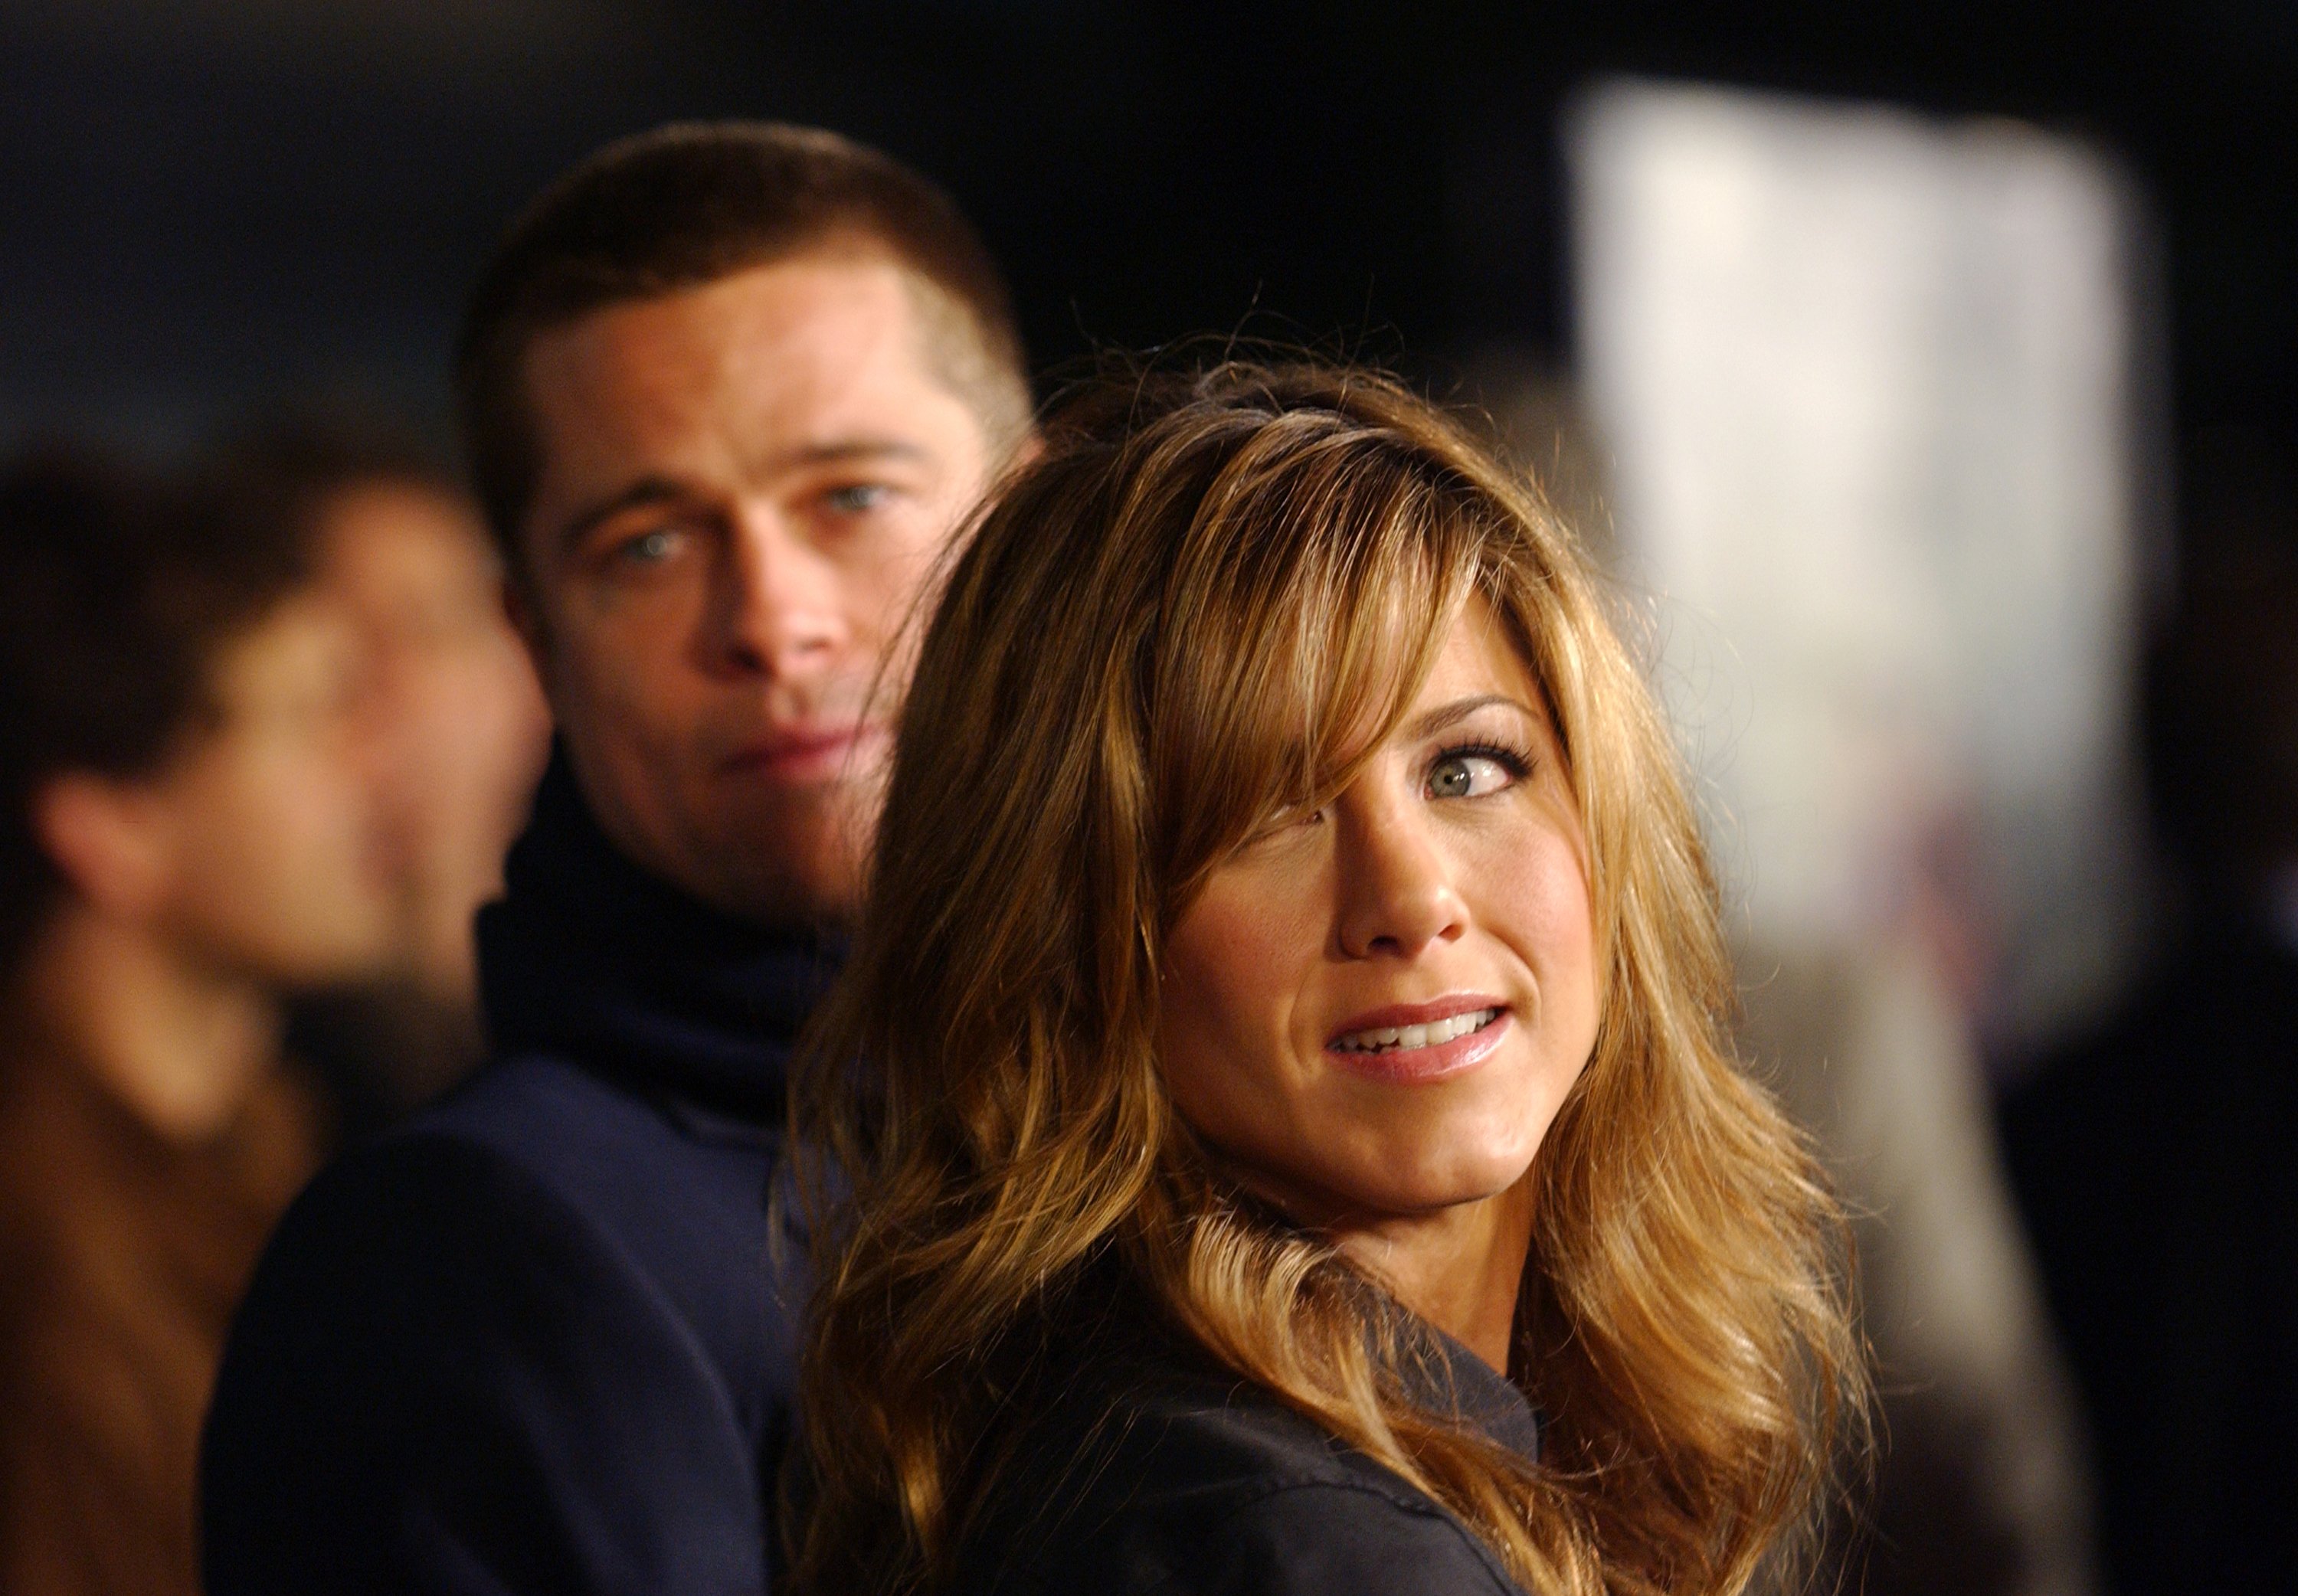  Jennifer Aniston and Brad Pitt during "Along Came Polly" Los Angeles Premiere at Mann's Chinese Theater in Hollywood, California, United States on January 12, 2004 | Source: Getty Images 